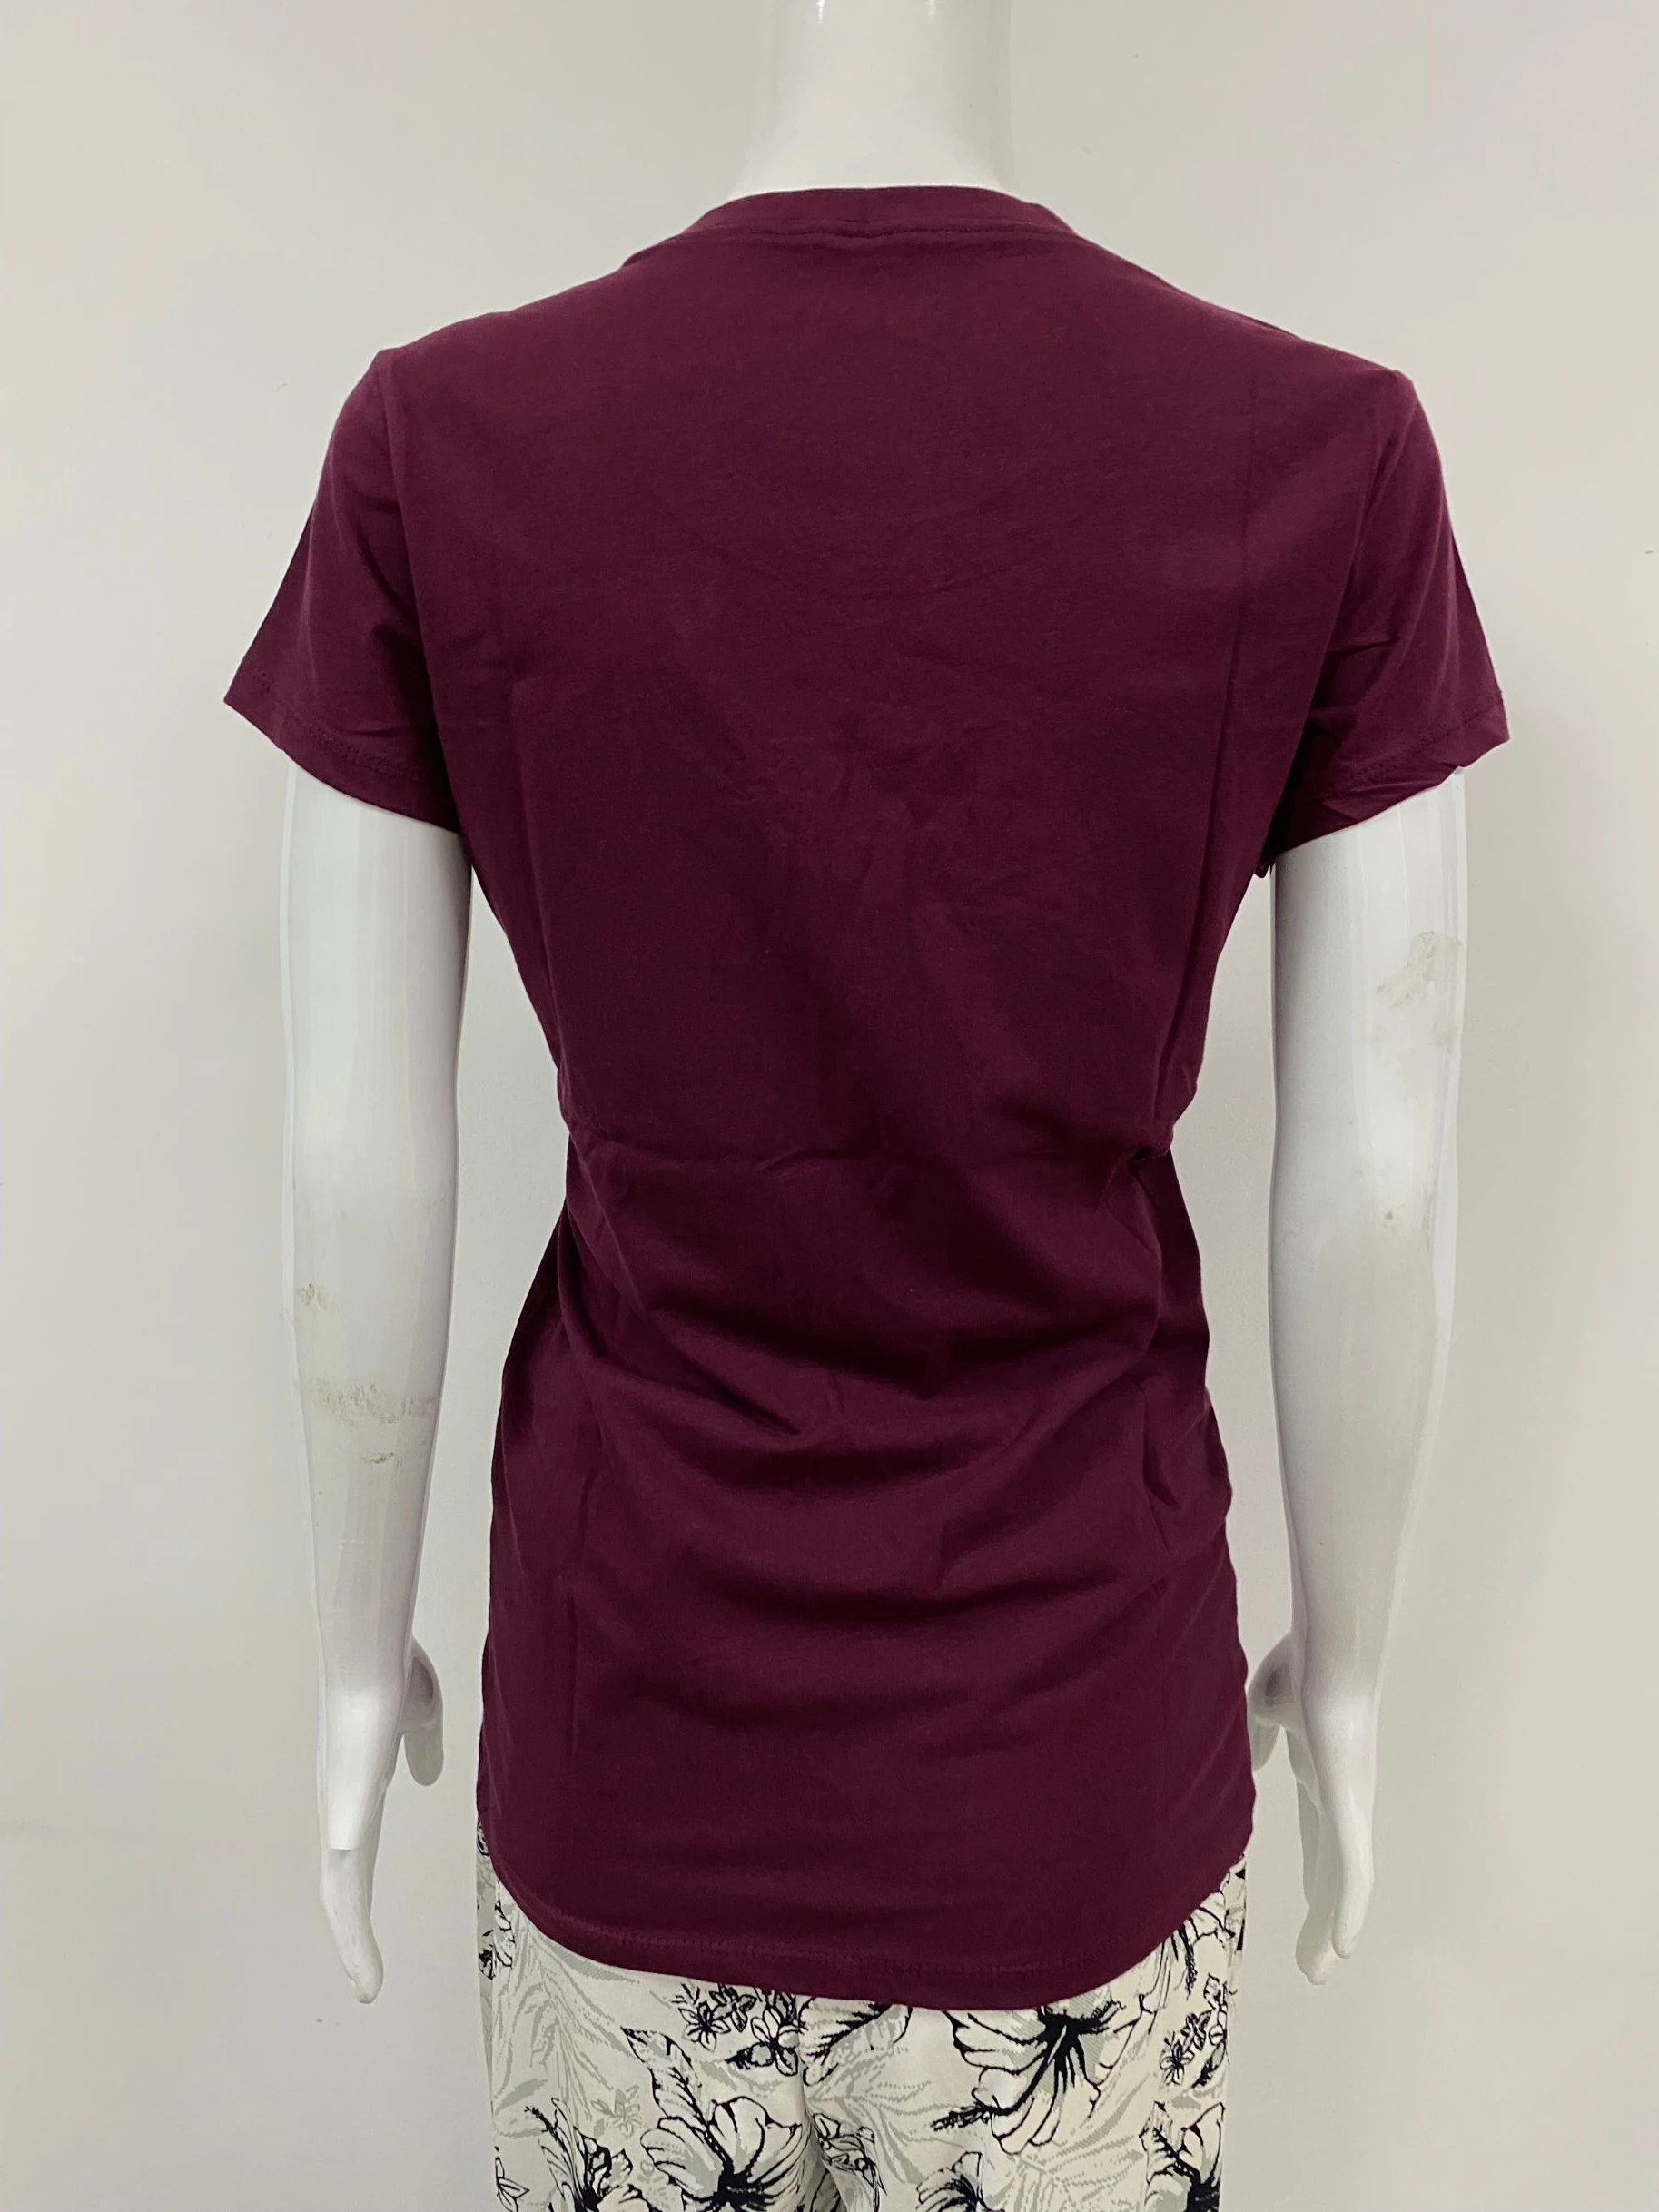 Hot Sale 95% Cotton 5% Spandex Casual Wear T Shirts High Quality O-Neck Short Sleeve T Shirts Comfortable Wear T Shirts